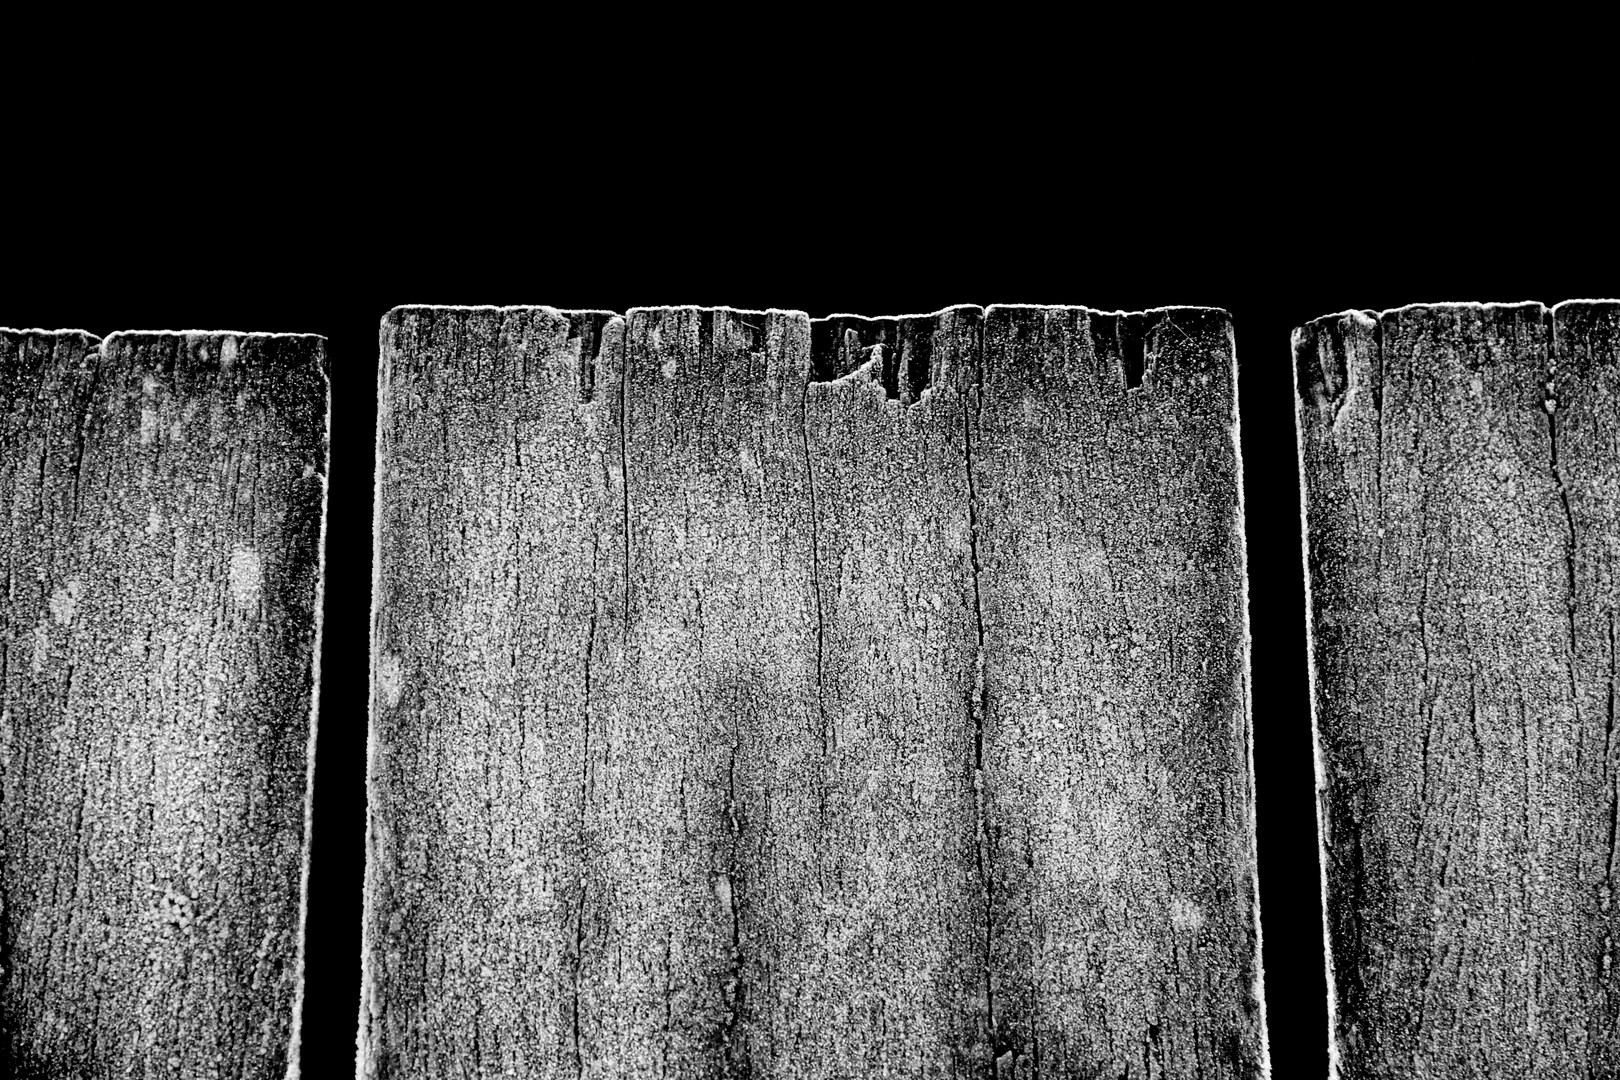 light ground frost on bridge plank ends over a small river